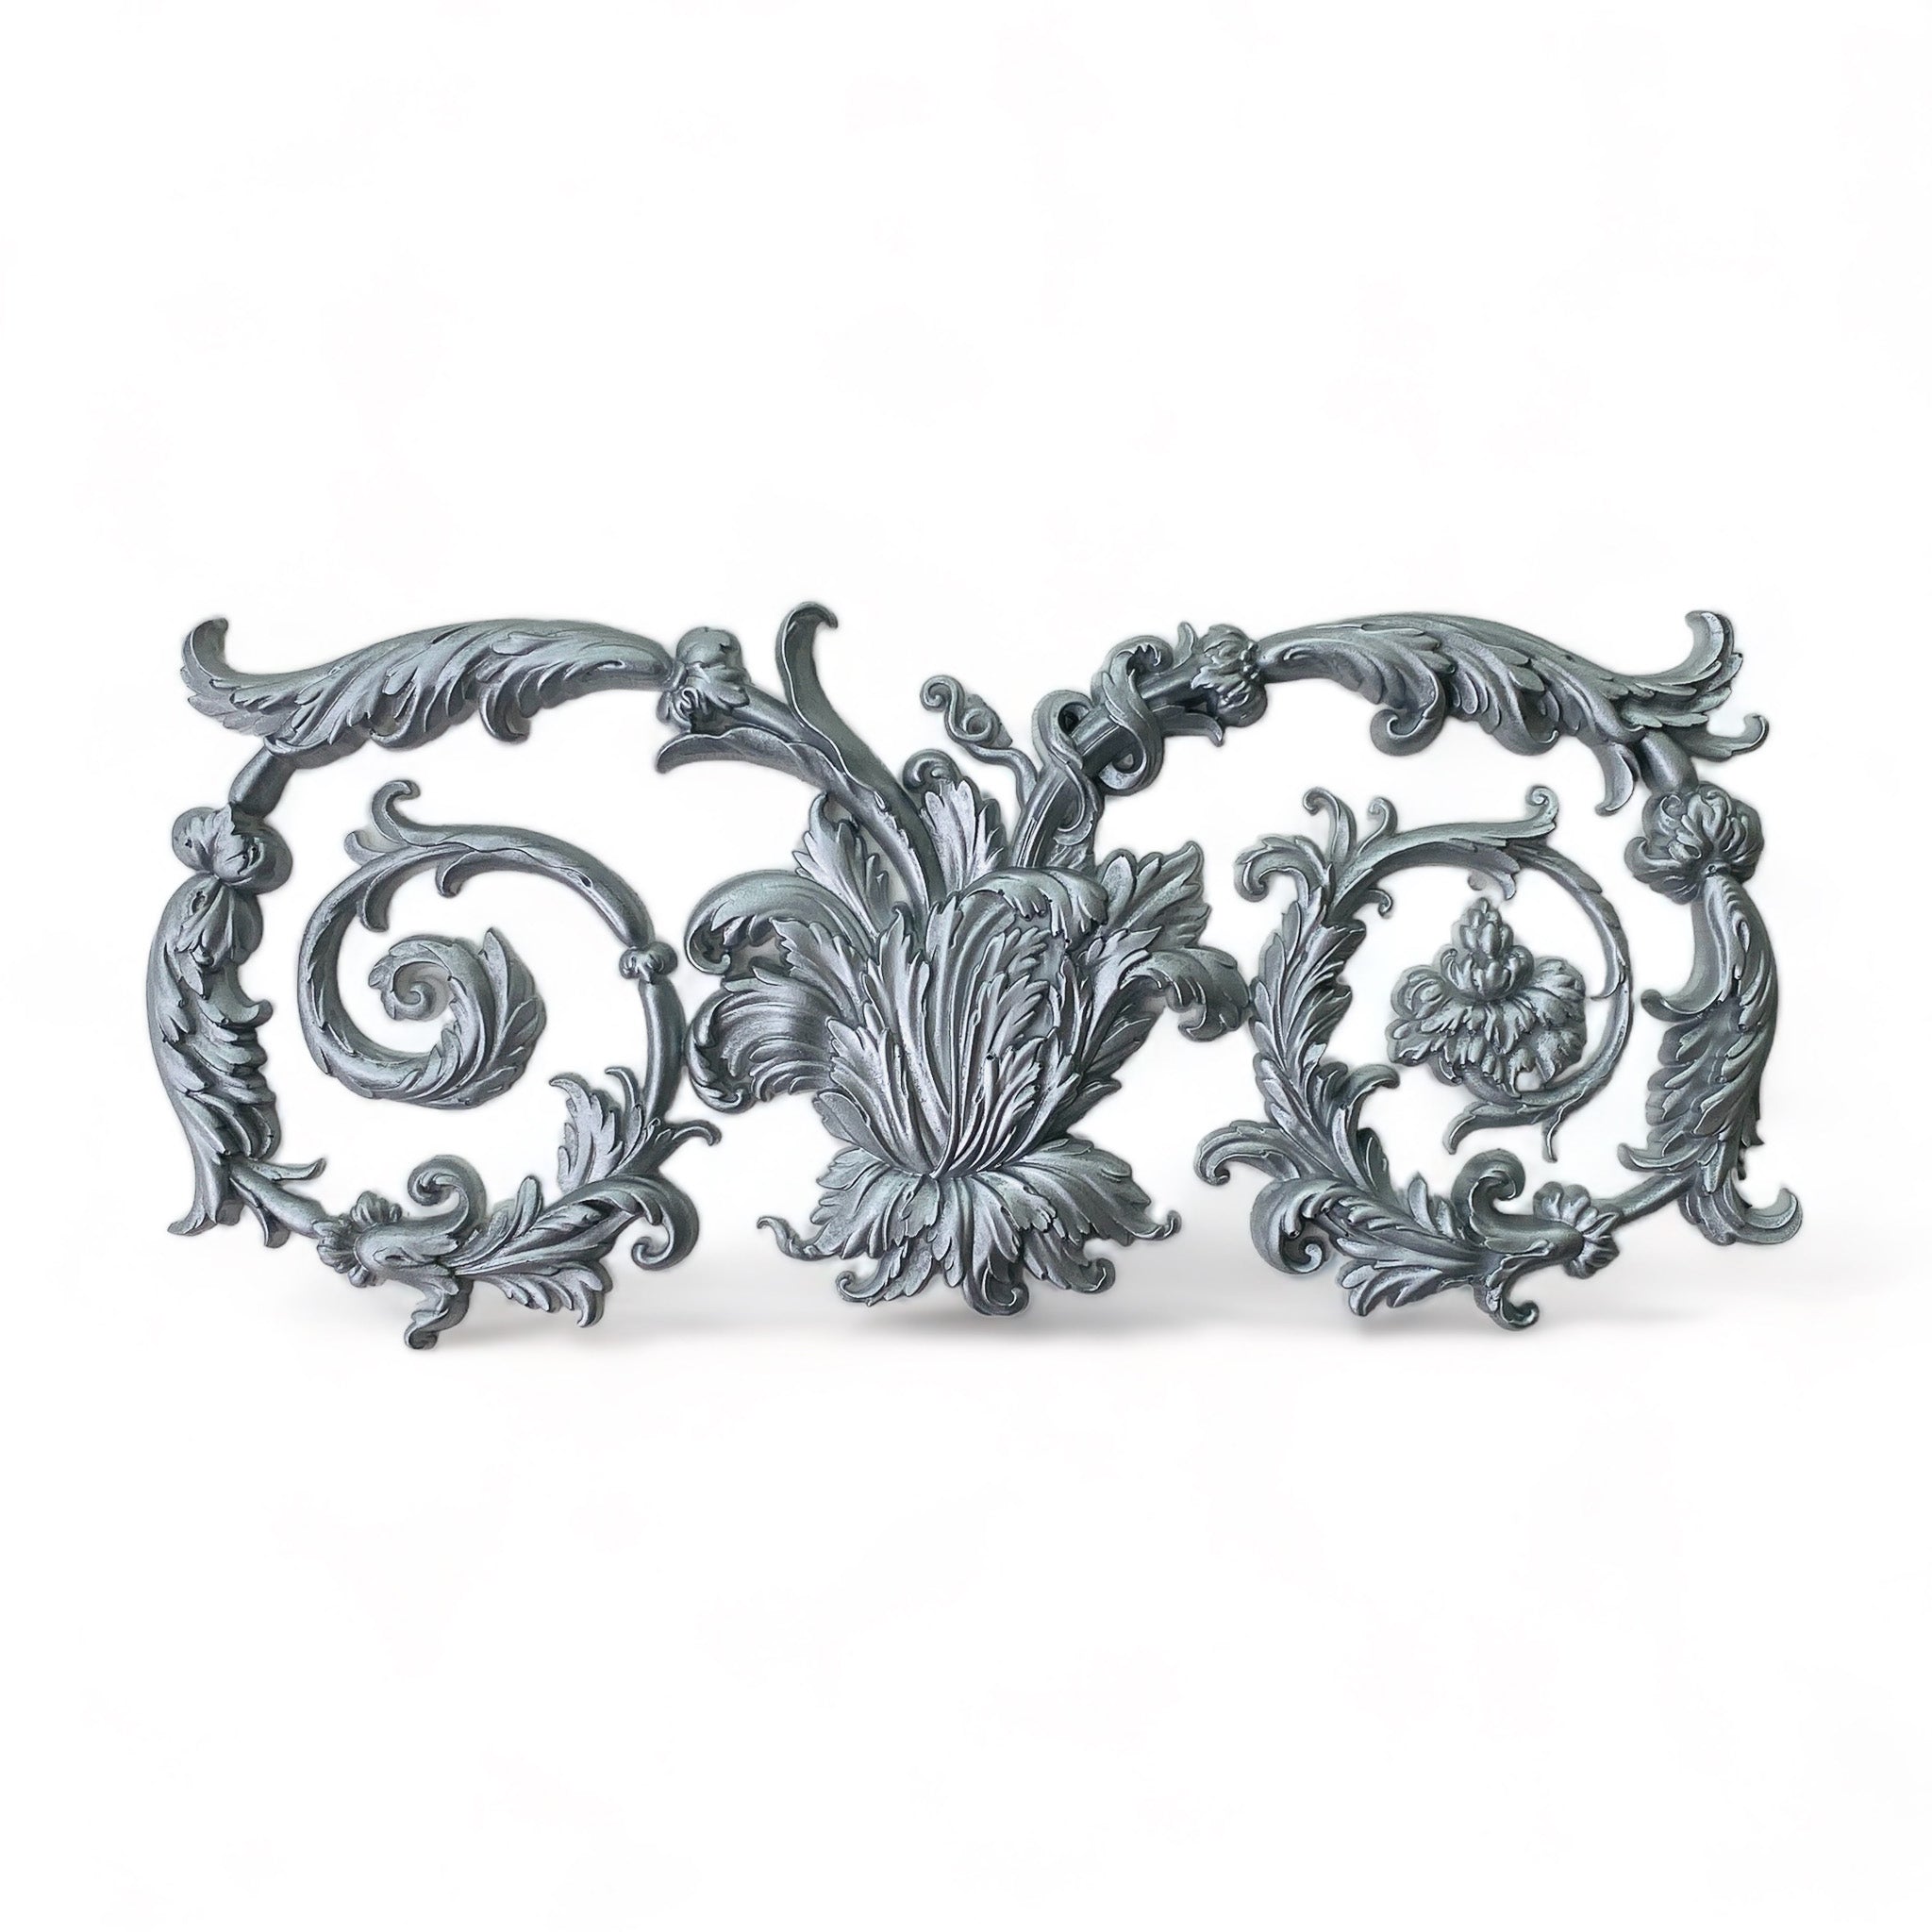 A silver-colored silicone mold casting of a large ornate curling scroll leaf accent piece is against a white background.